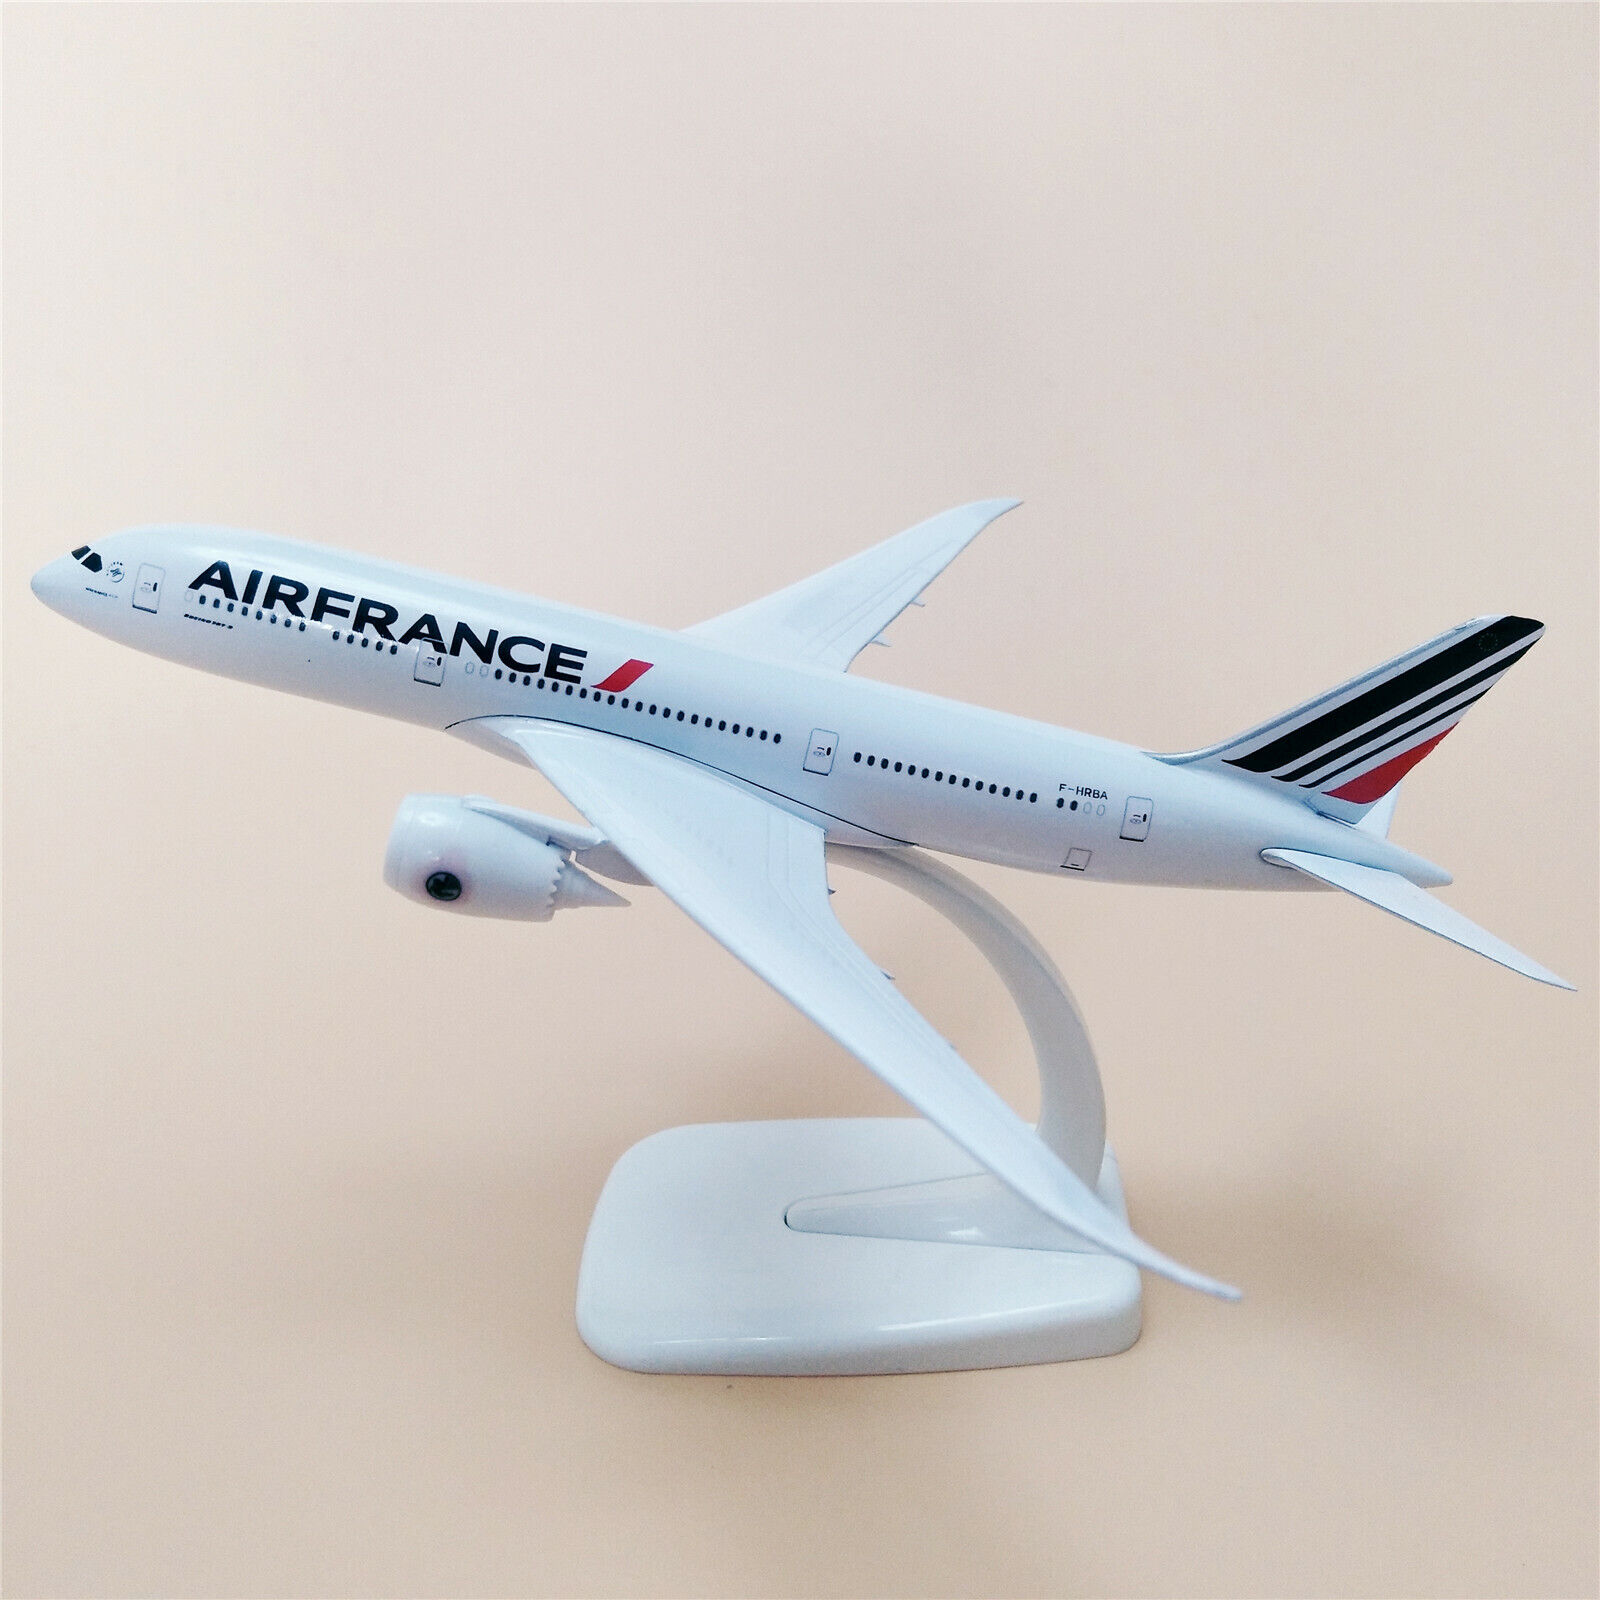 20cm Air France Boeing B787 Airlines Aircraft Airplane Model Plane Alloy Metal